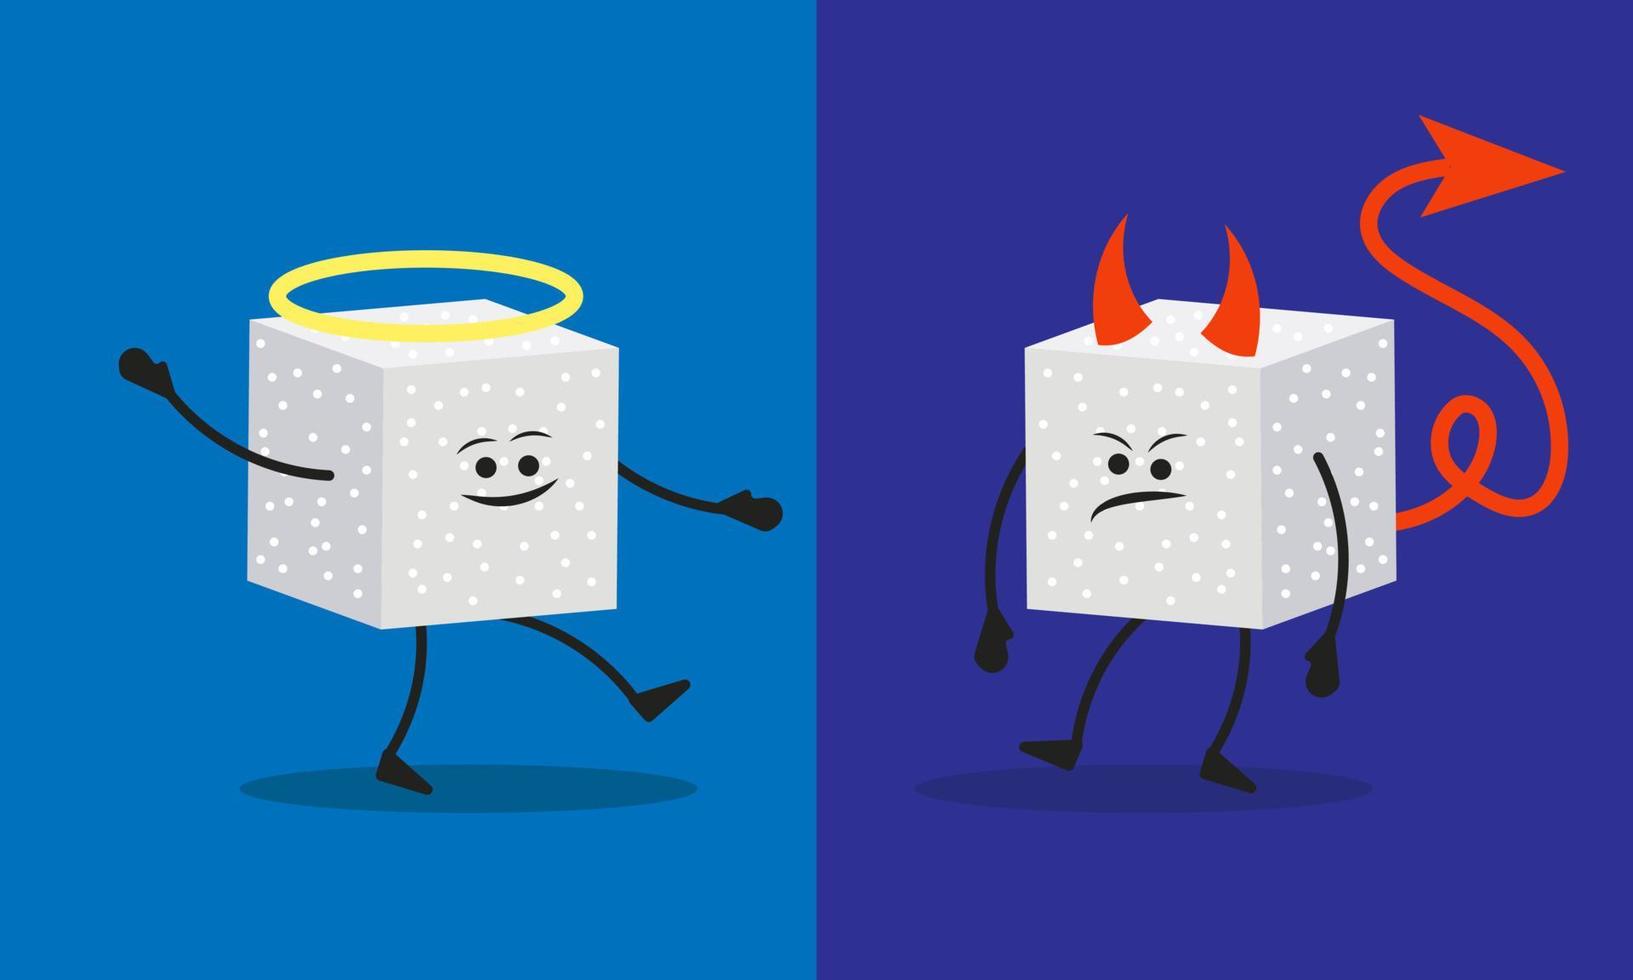 Bad and good sugar and comparison of the usefulness of cartoon sugar in food. Good helpful angel character vs bad sugar devil. Healthy or tasty food in sweets and drinks concept vector illustration